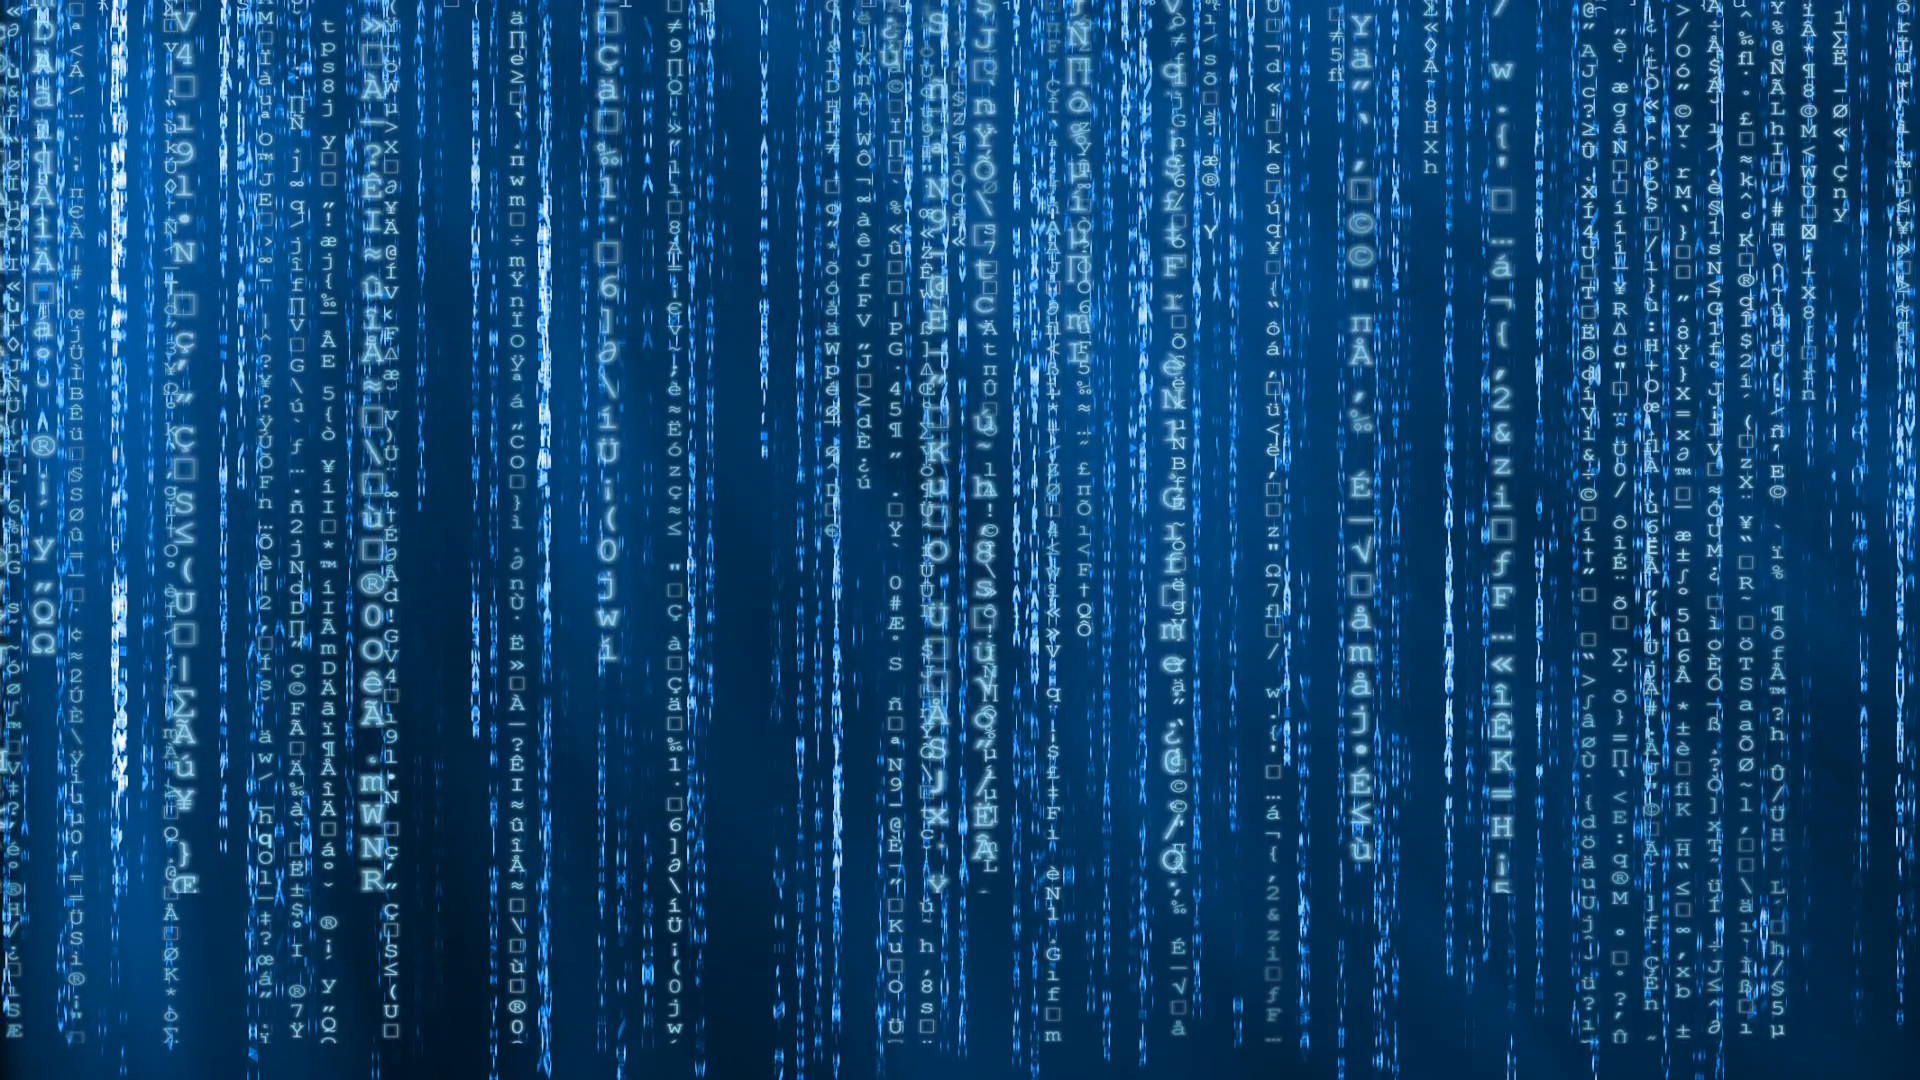 1920x1080 ...  Blue animated matrix background, computer code with symbols  and